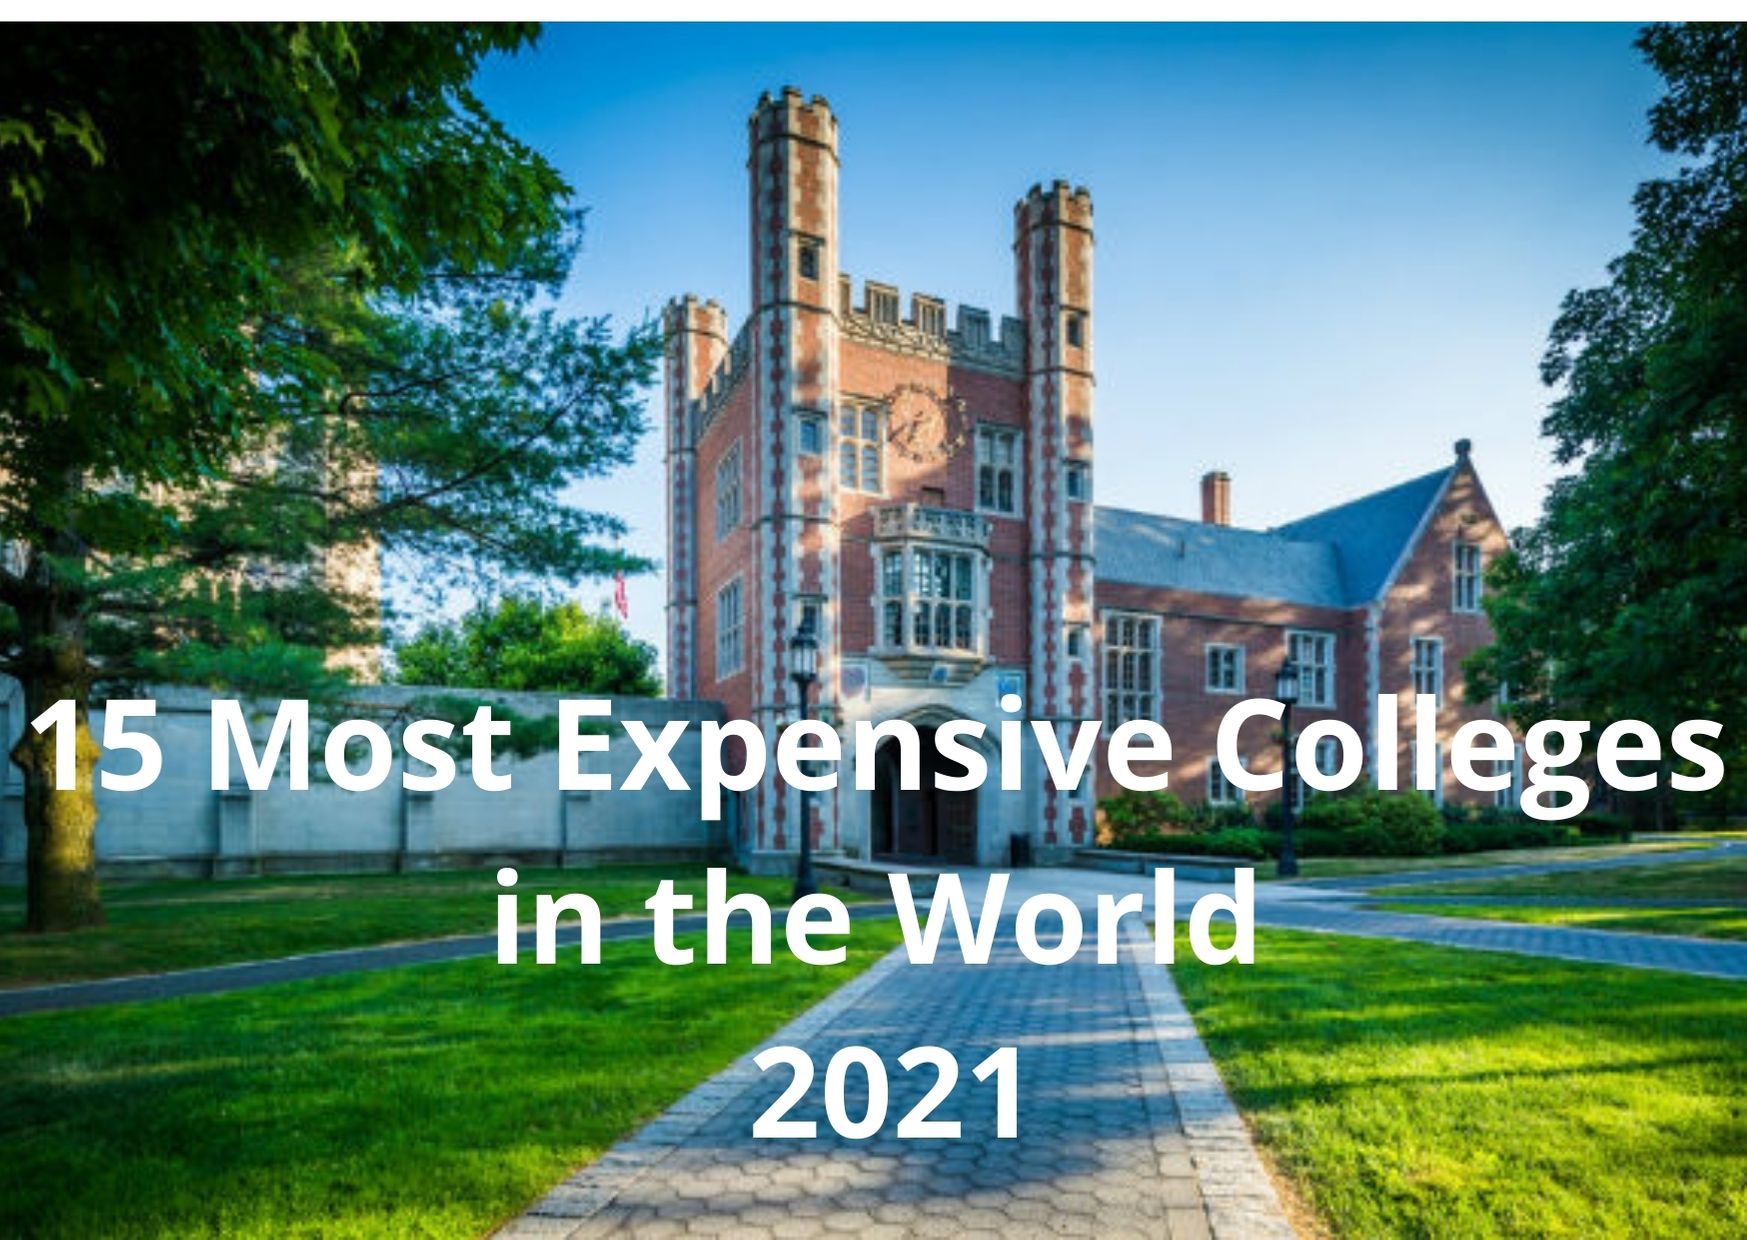 Top 10 Hardest Undergraduate Degrees In The World in 2022